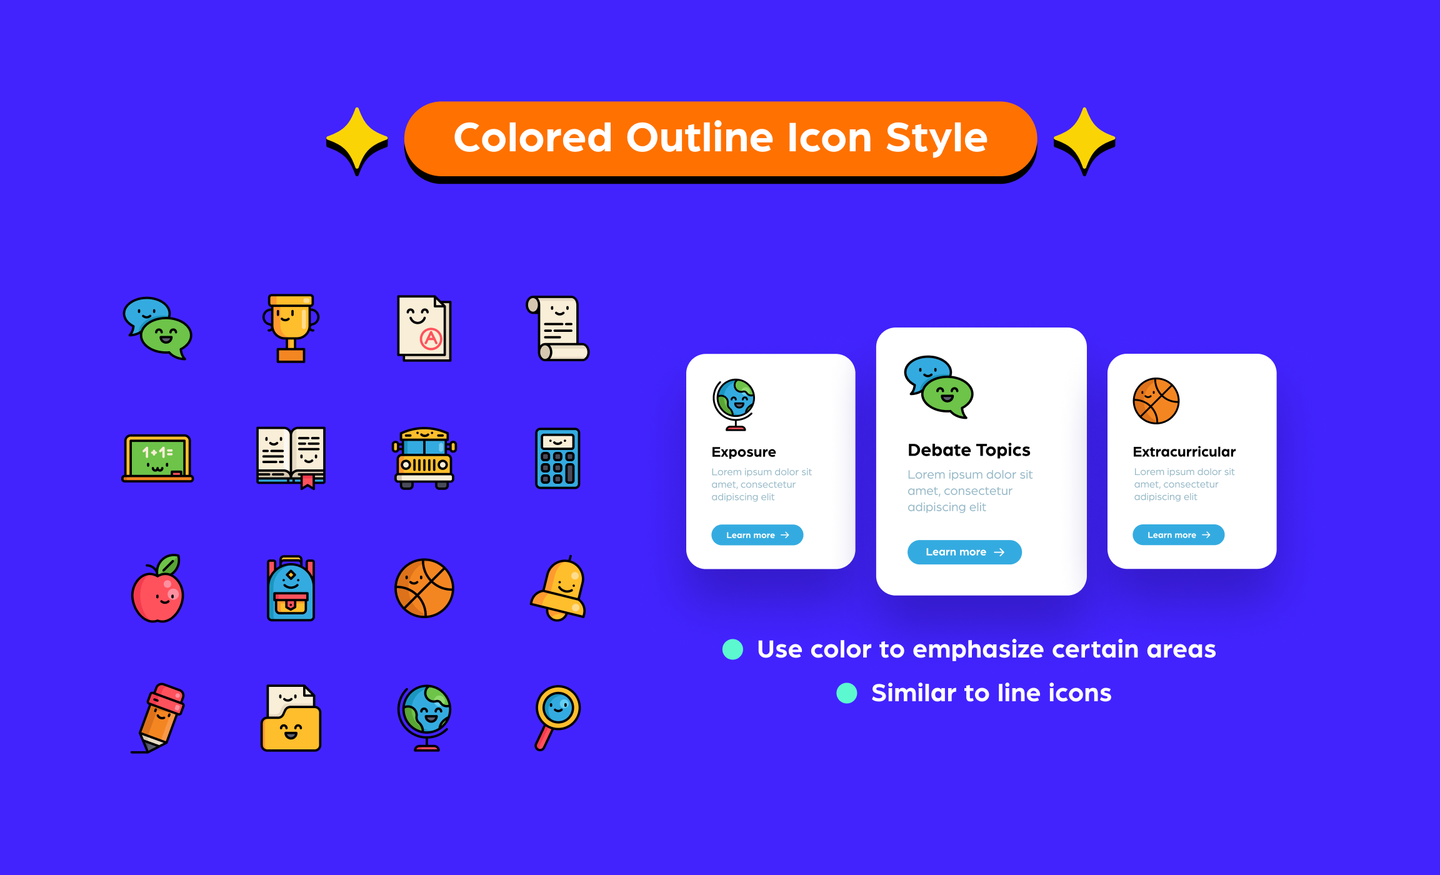 A guide to the colored outline icon style